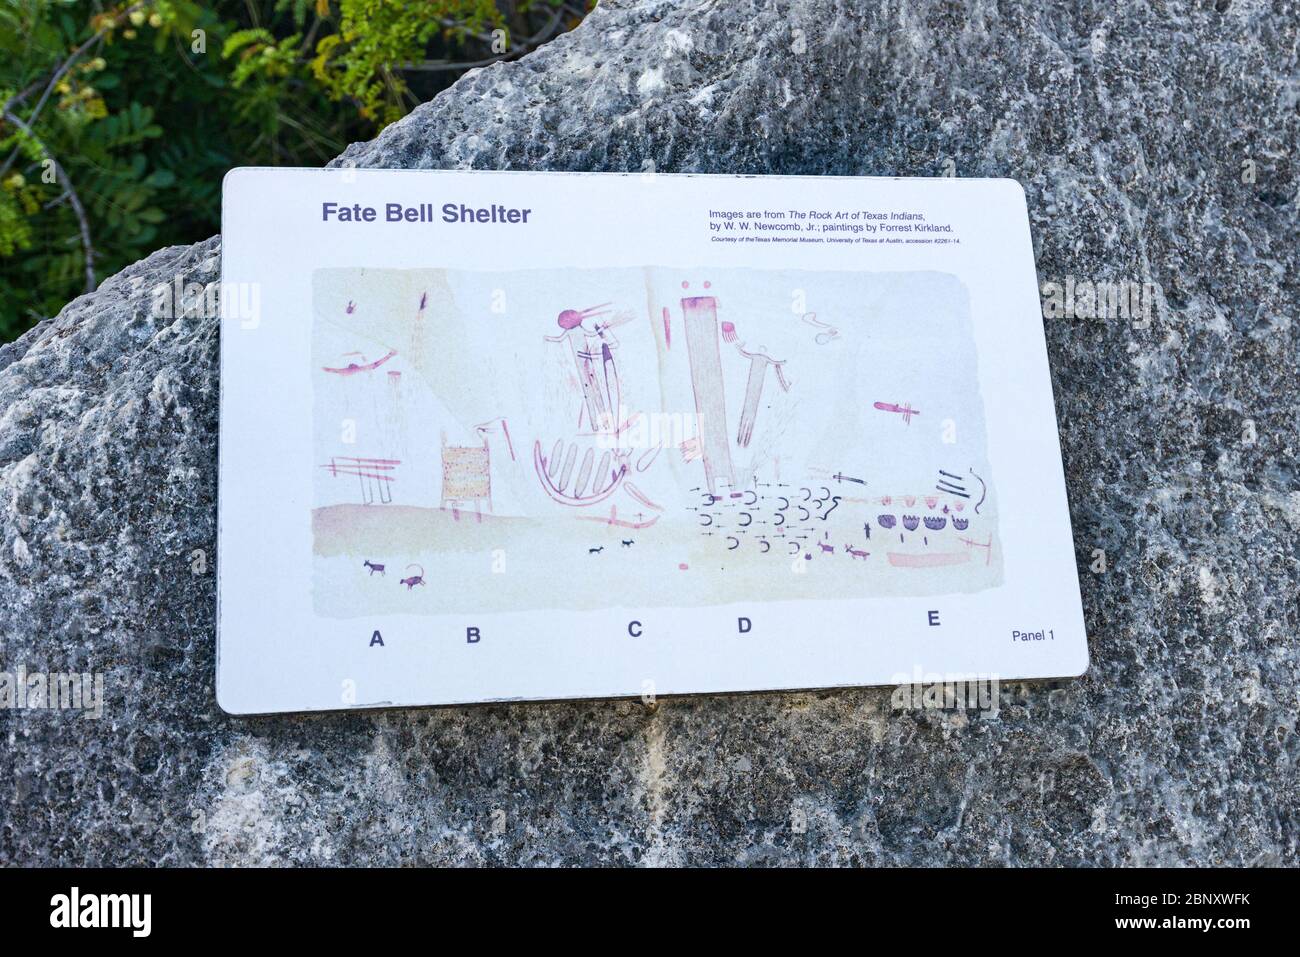 Guide plate showing the various navajo wall art pictographs on the canyon walls of Fate Bell Shelter in Seminole Canyon, Texas Stock Photo